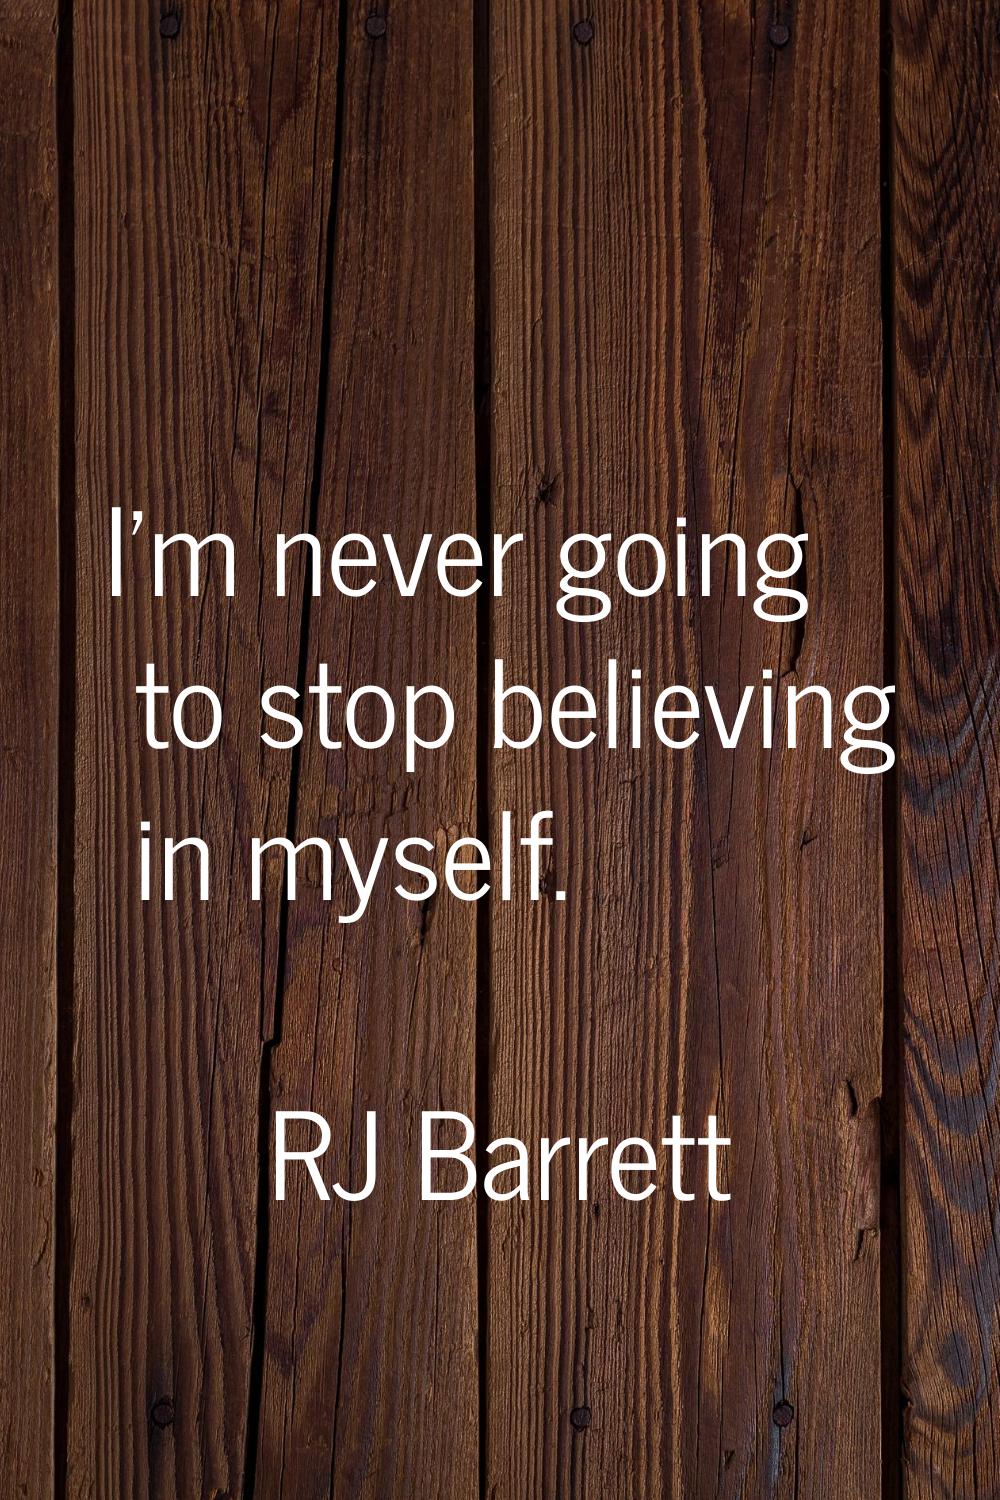 I'm never going to stop believing in myself.